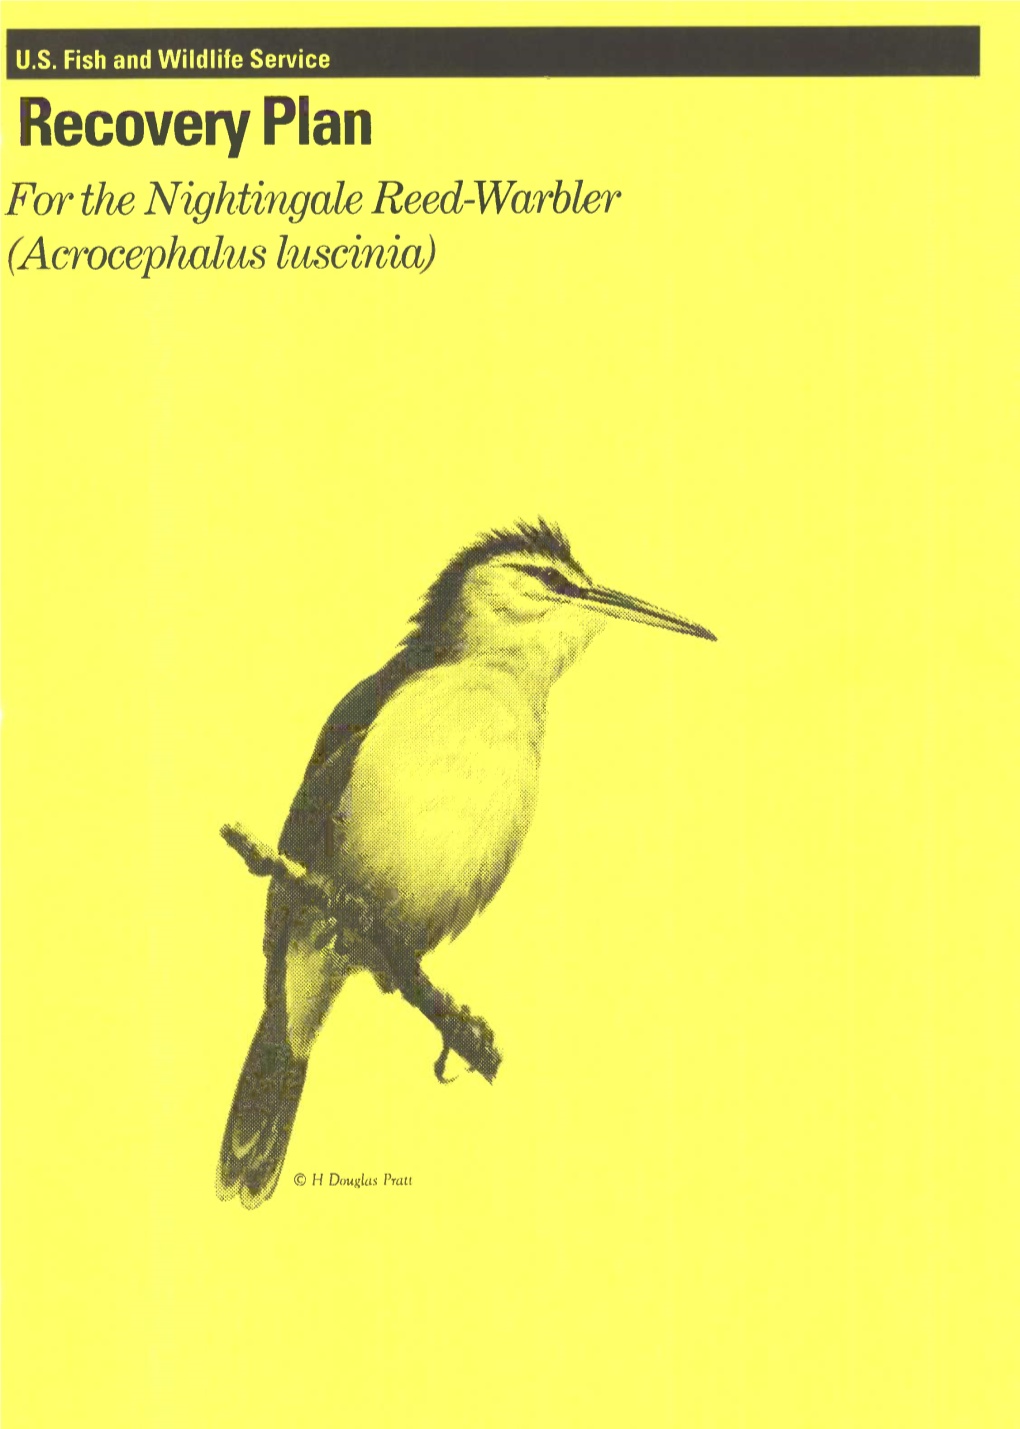 RECOVERY PLAN for the NIGHTINGALE REED-WARBLER (Acrocephalus Luscinia)